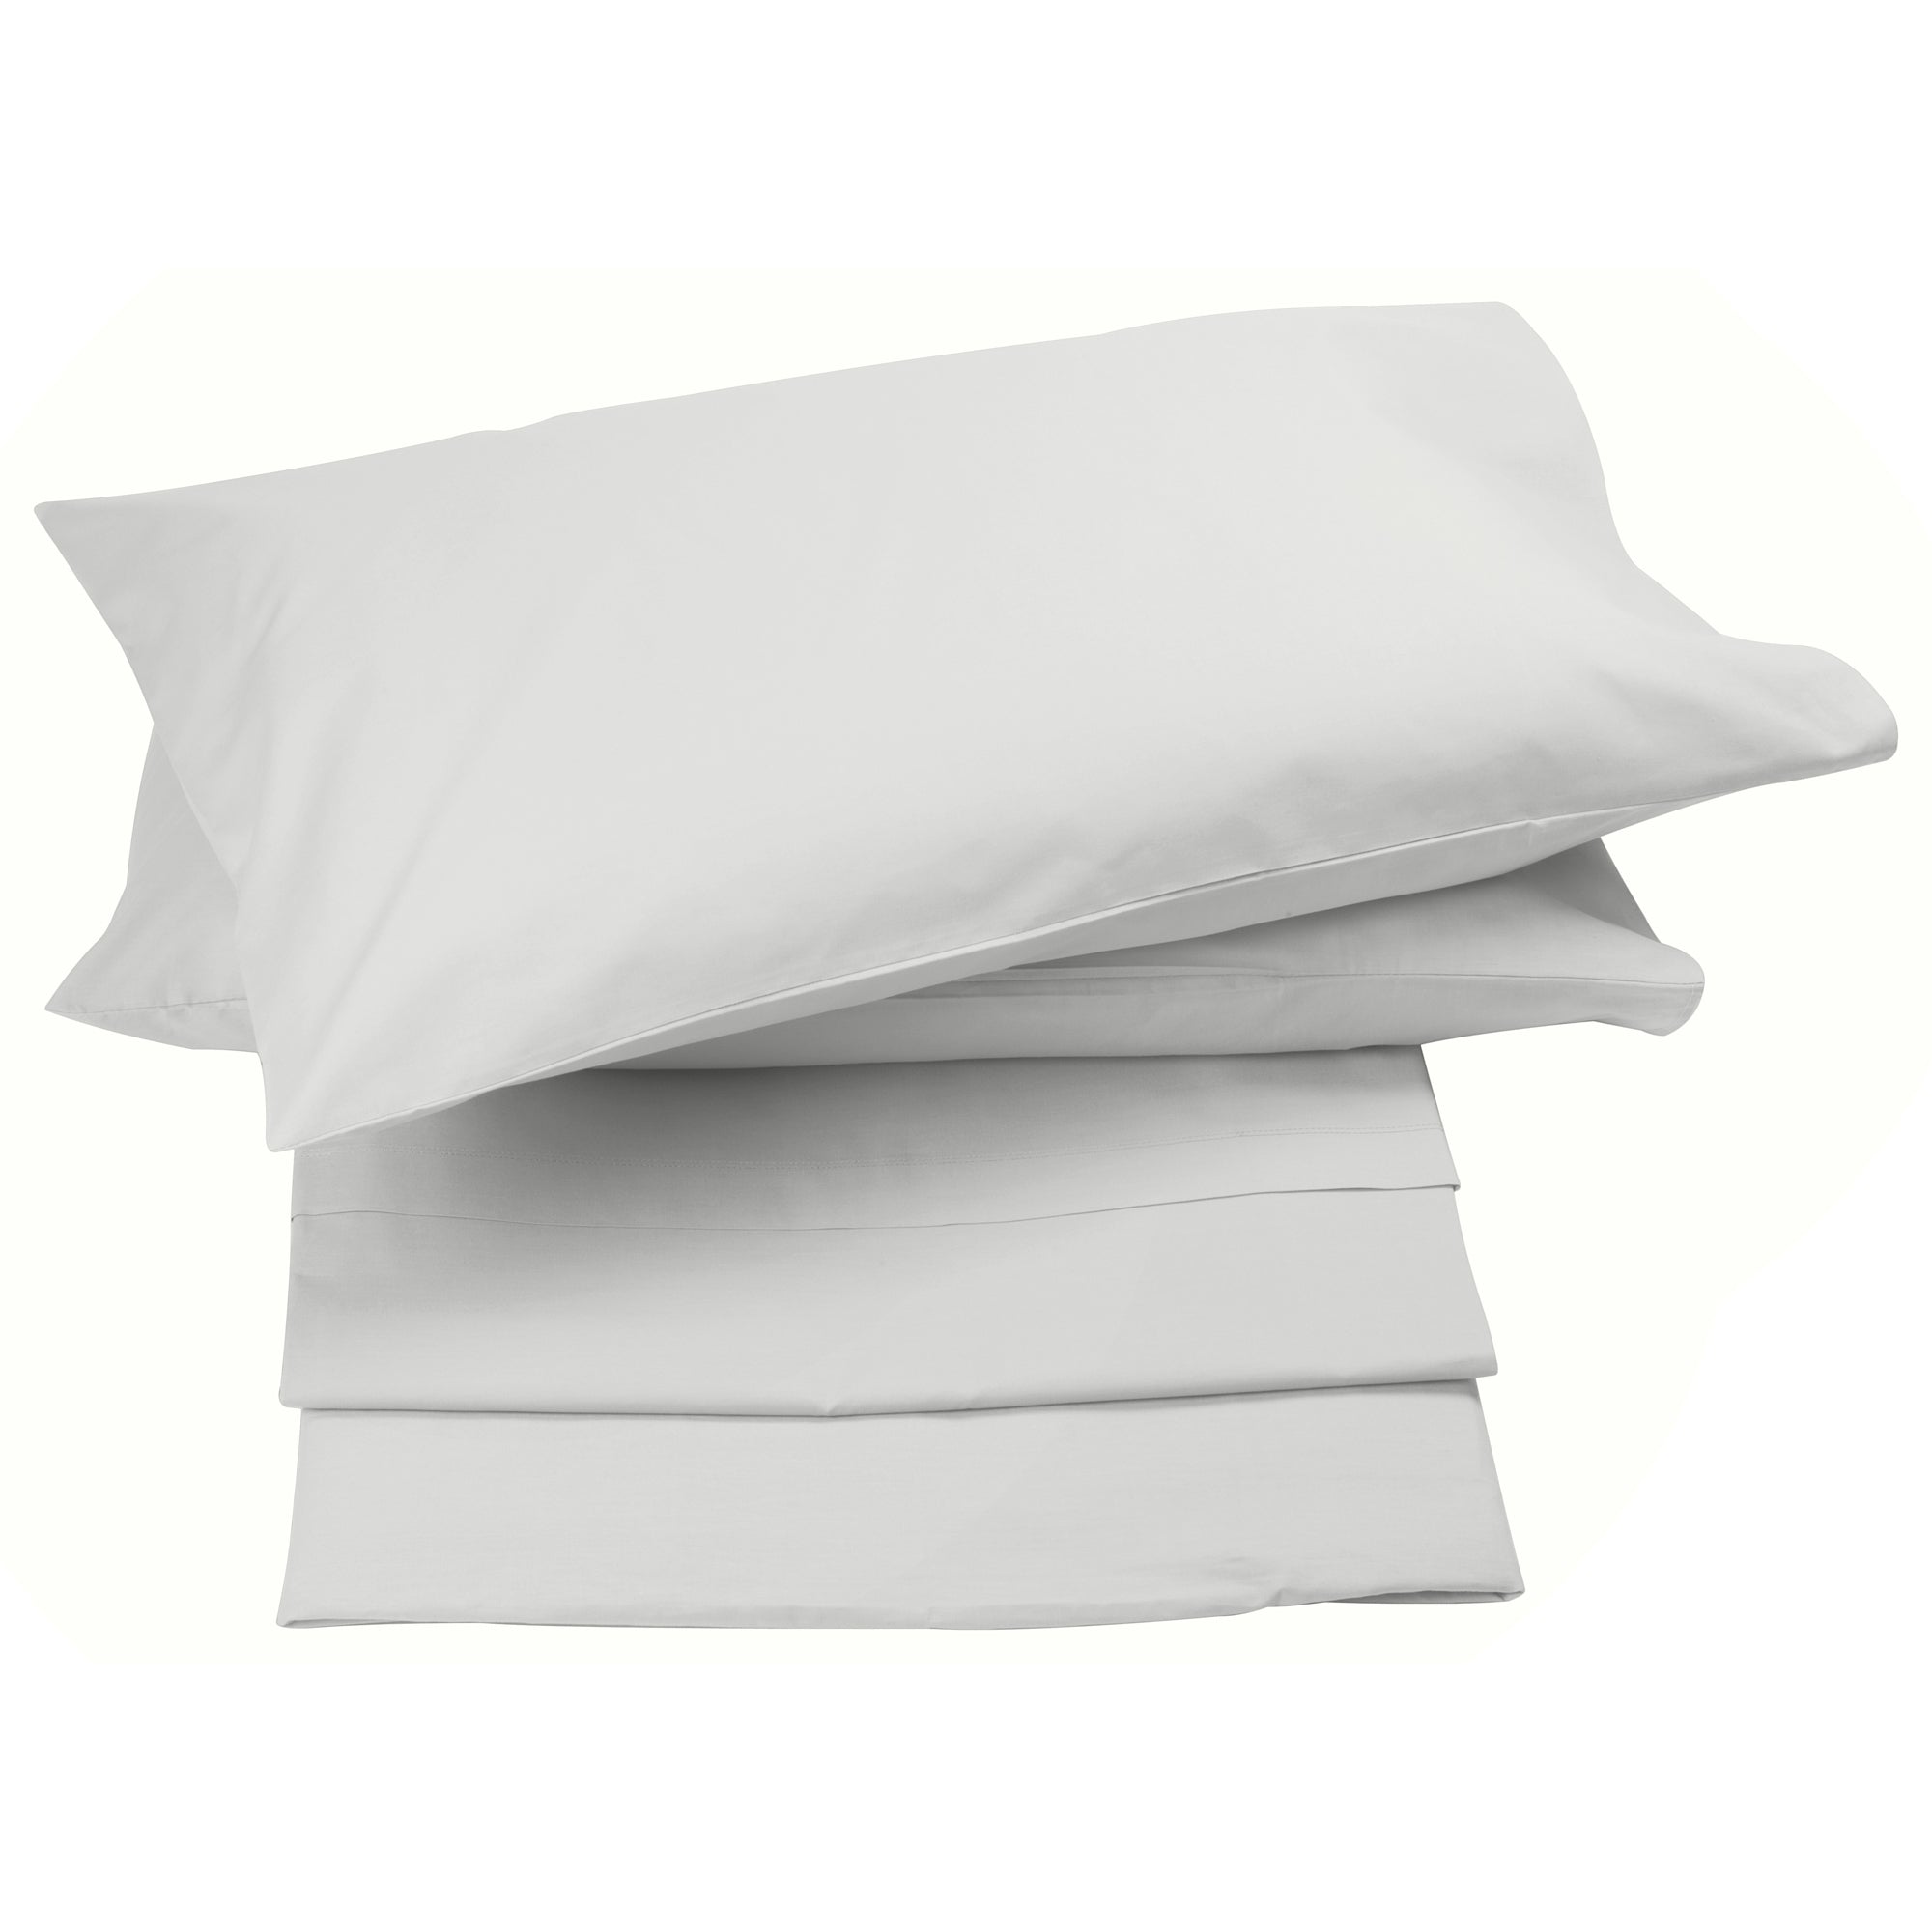 Sheet set in 100% Gray Percale Cotton